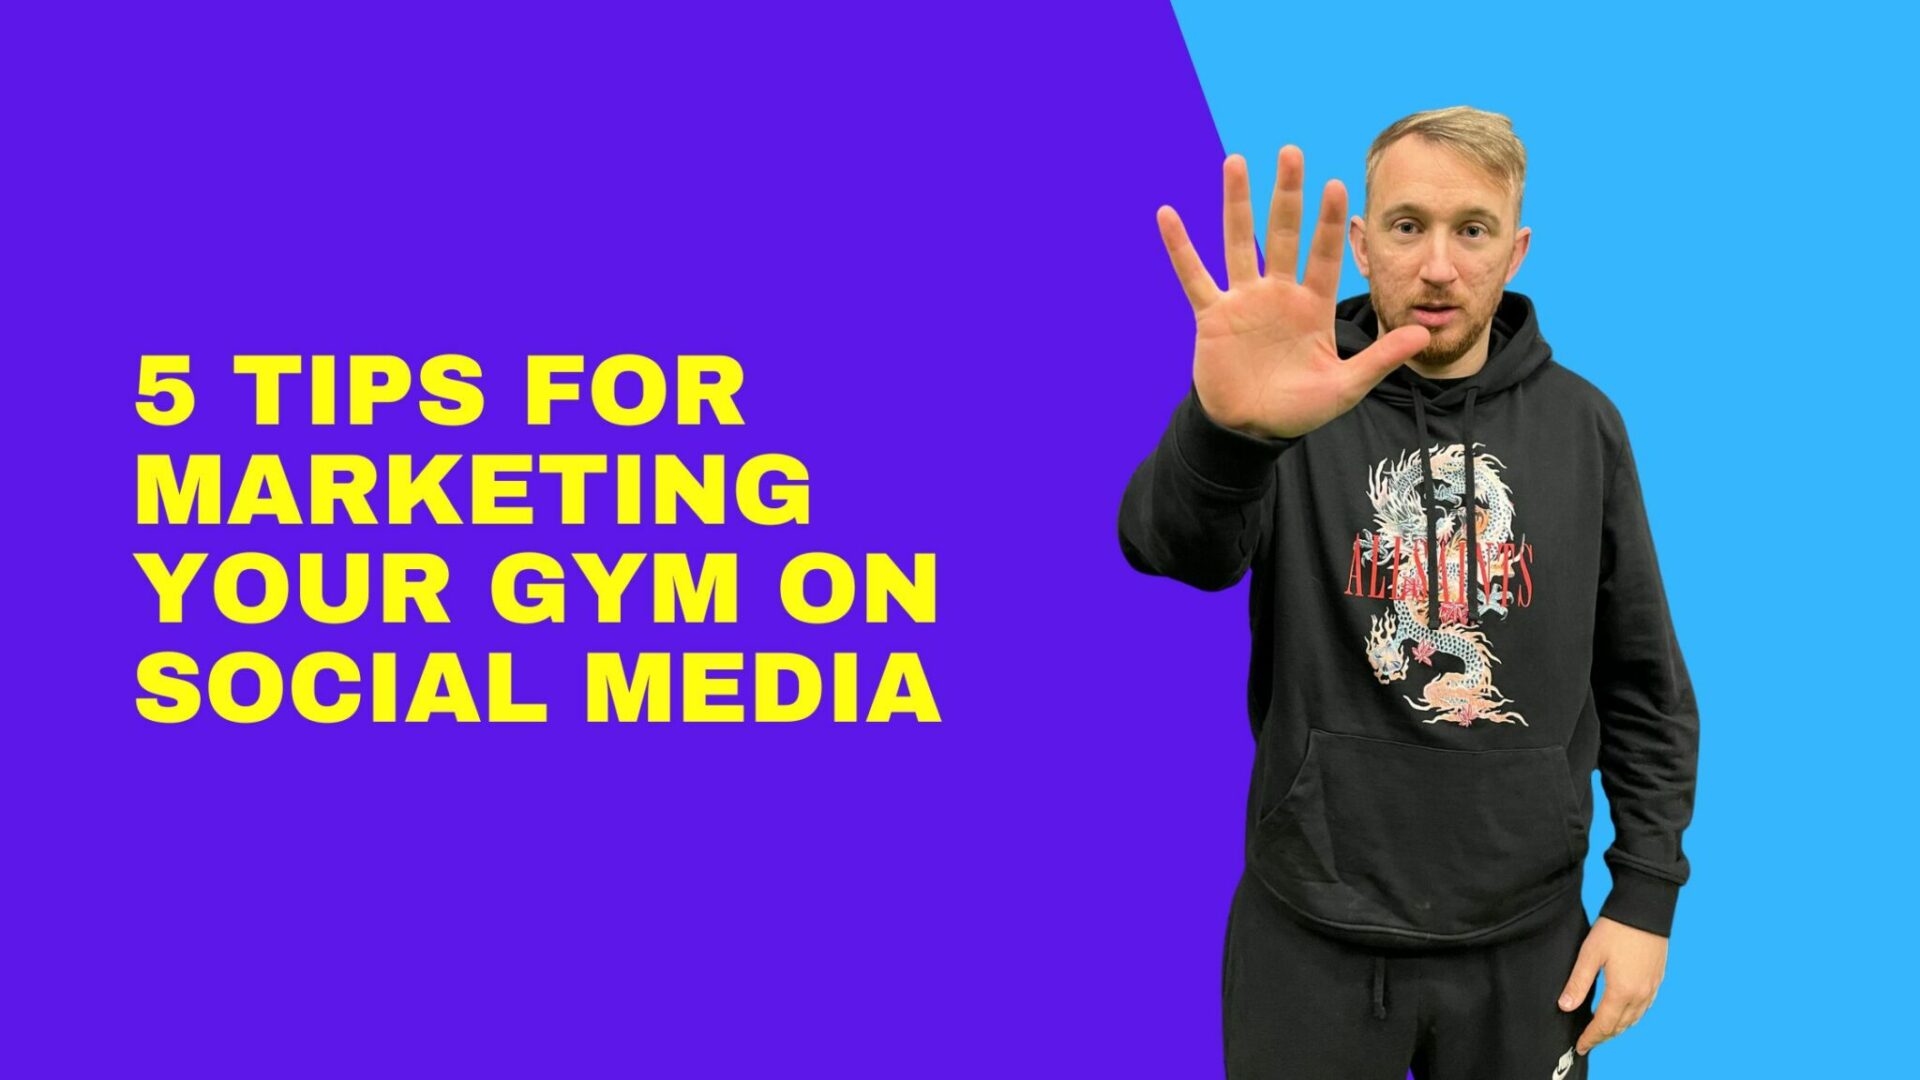 5 Tips for Marketing Your Gym on Social Media